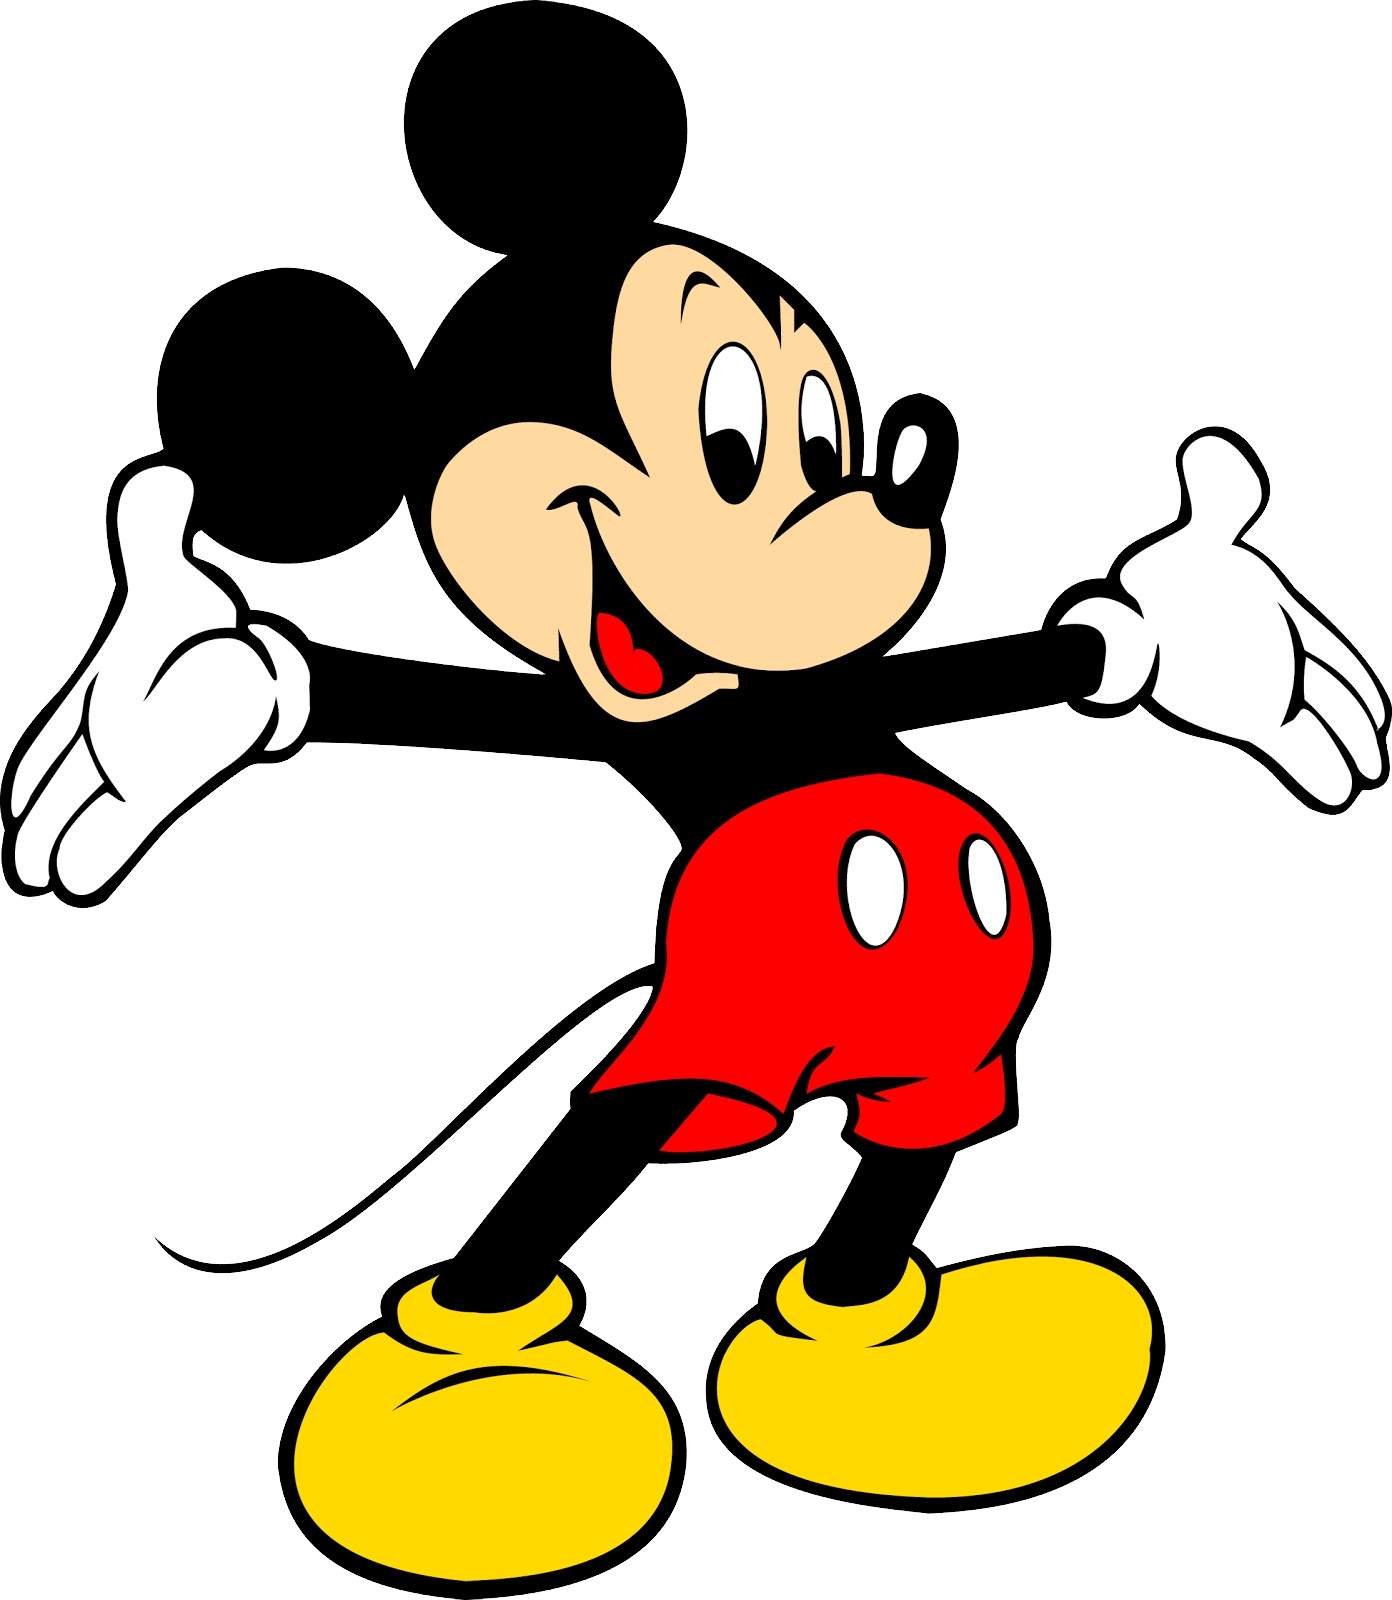 Mickey Mouse PNG Image PurePNG Free transparent CC0 PNG Image Library